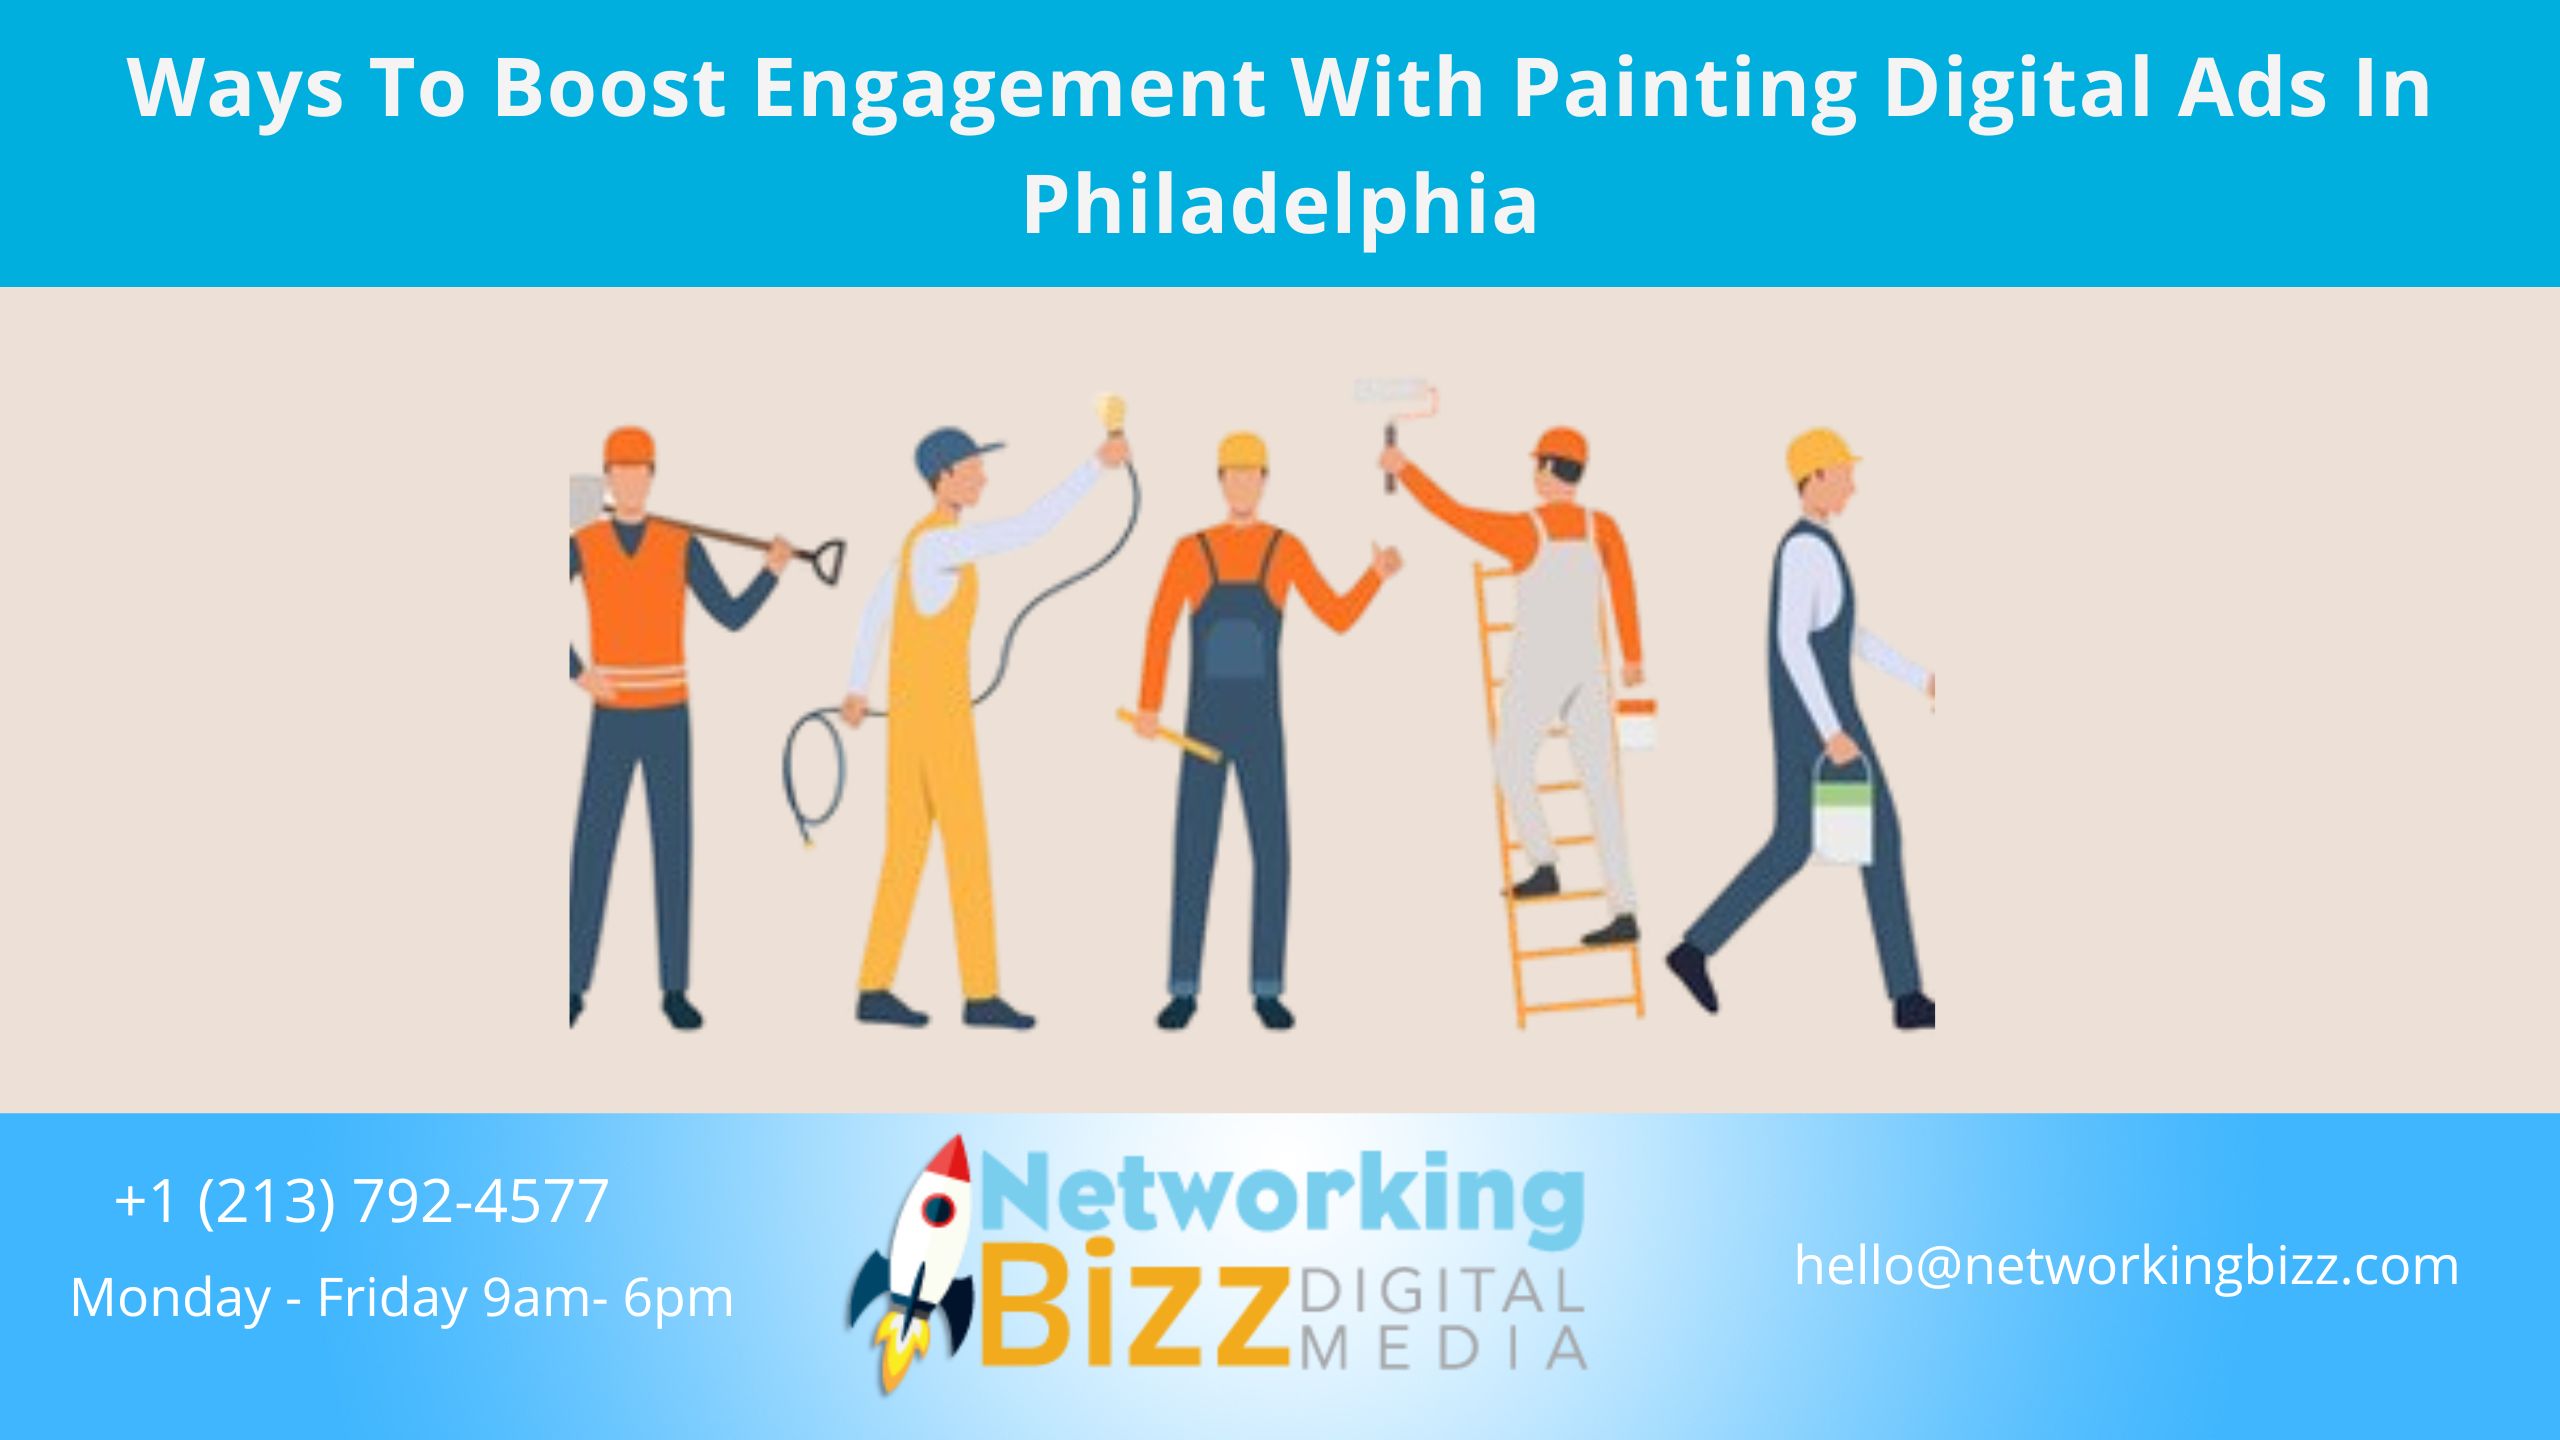 Ways To Boost Engagement With Painting Digital Ads In Philadelphia